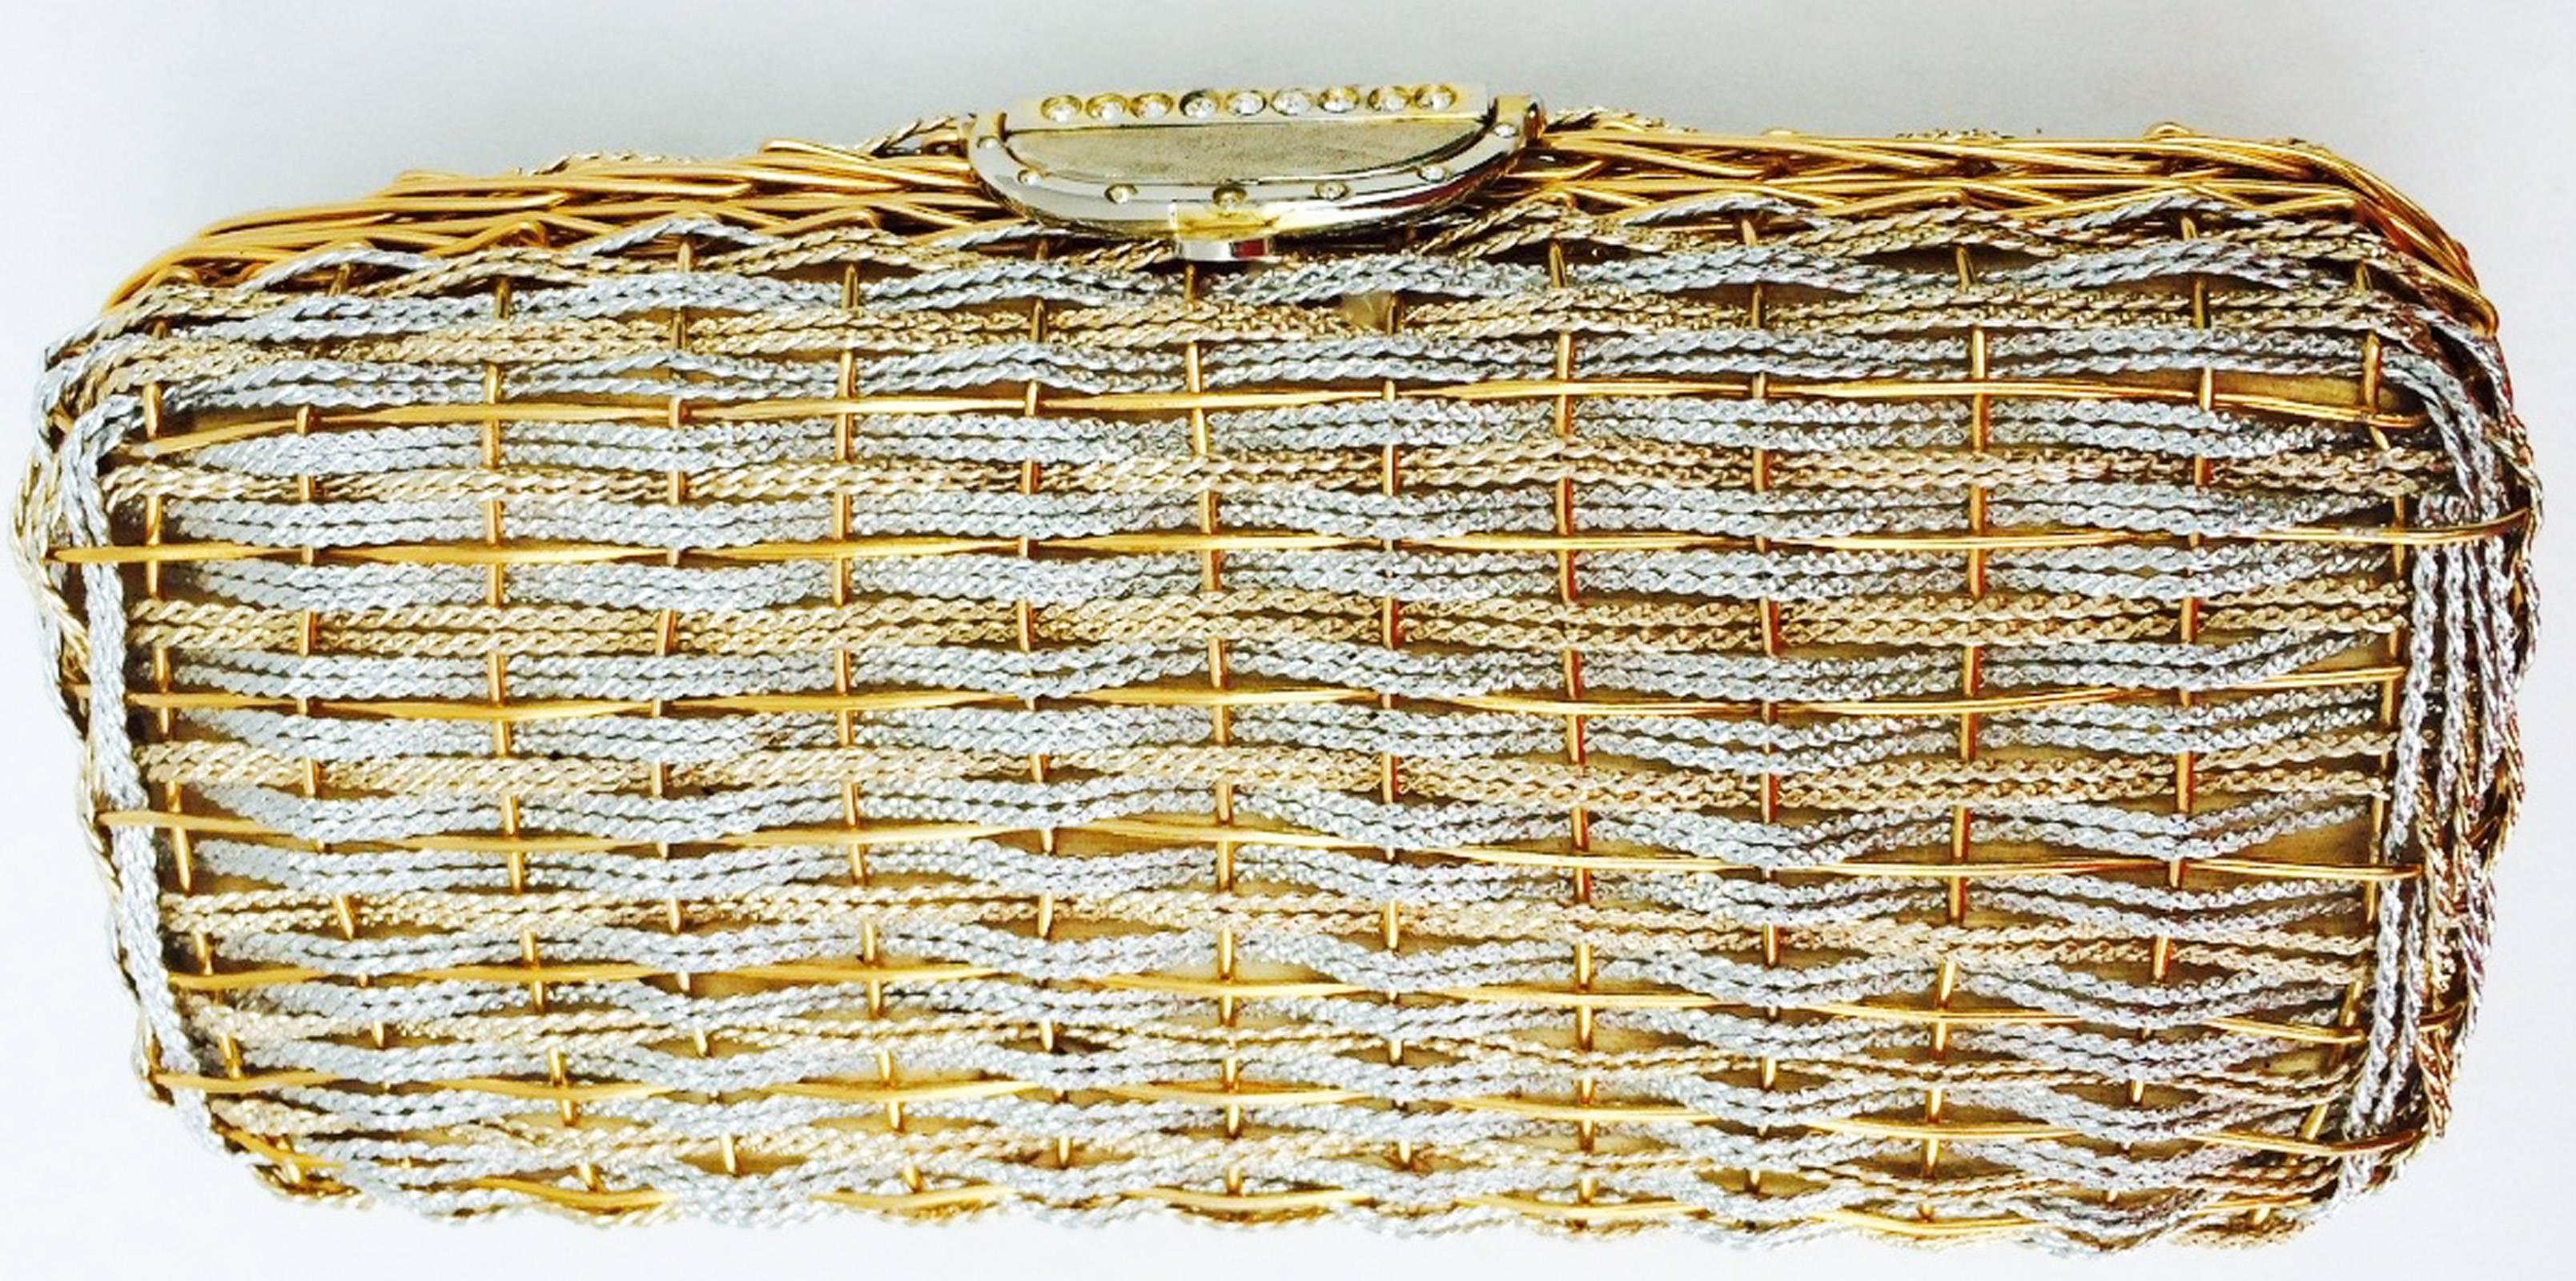 A fine vintage Koret minaudiere clutch handbag. Authentic woven two-tone (silver/gold) metal item features a gilt fold-over clasp. Bright metallic gold vinyl lining and crystal trim intact. Excellent.